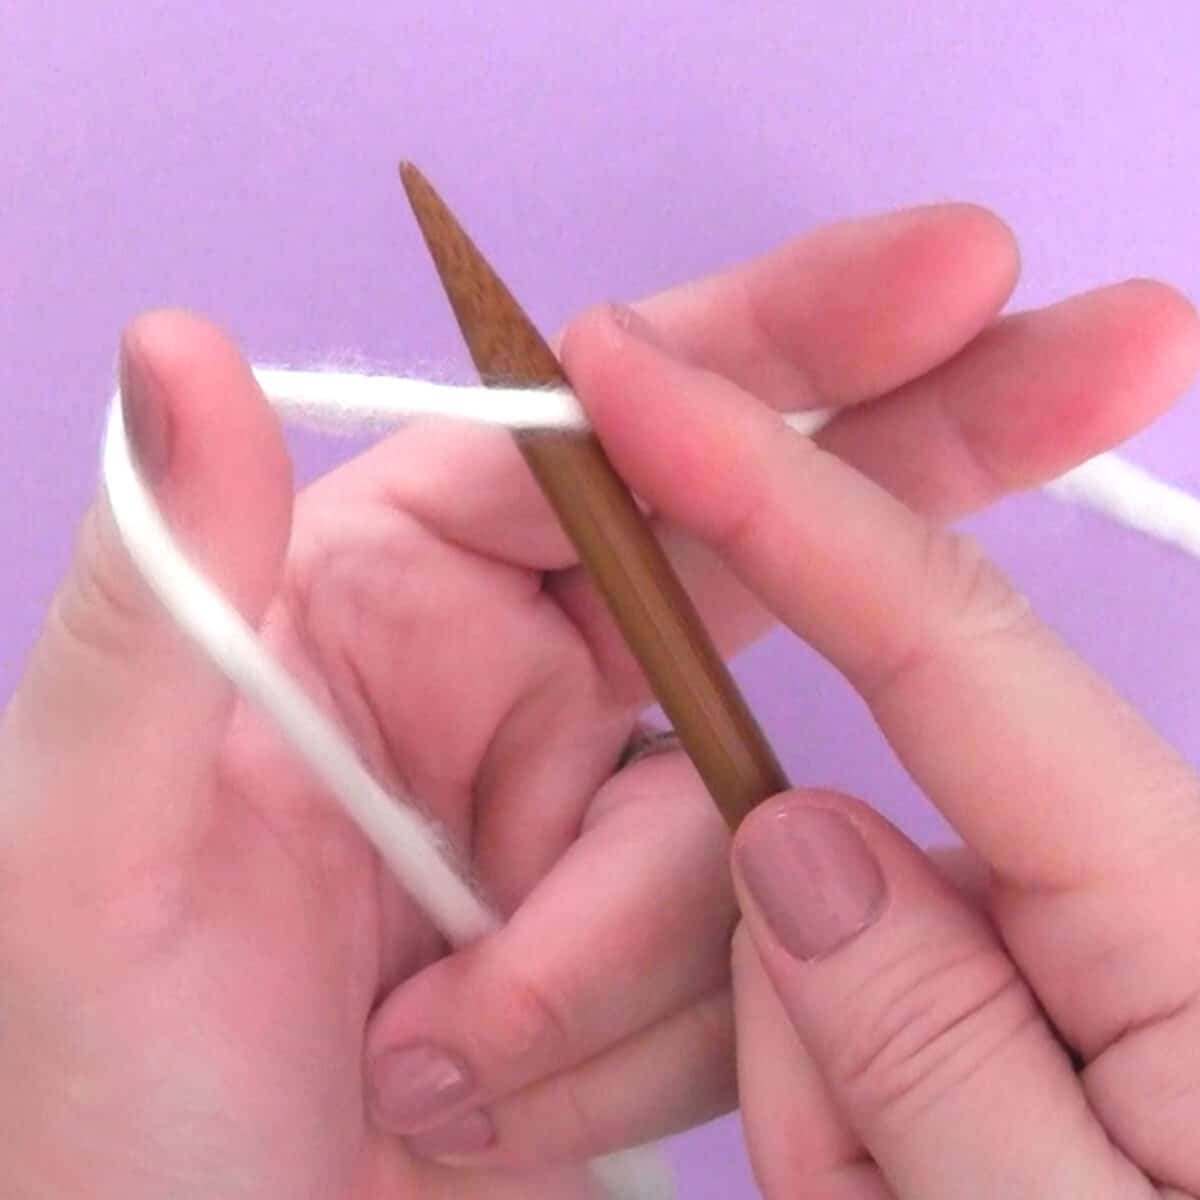 Hands demonstrating how to cast on without a slip knot with white yarn and wooden bamboo knitting needles atop a purple background.